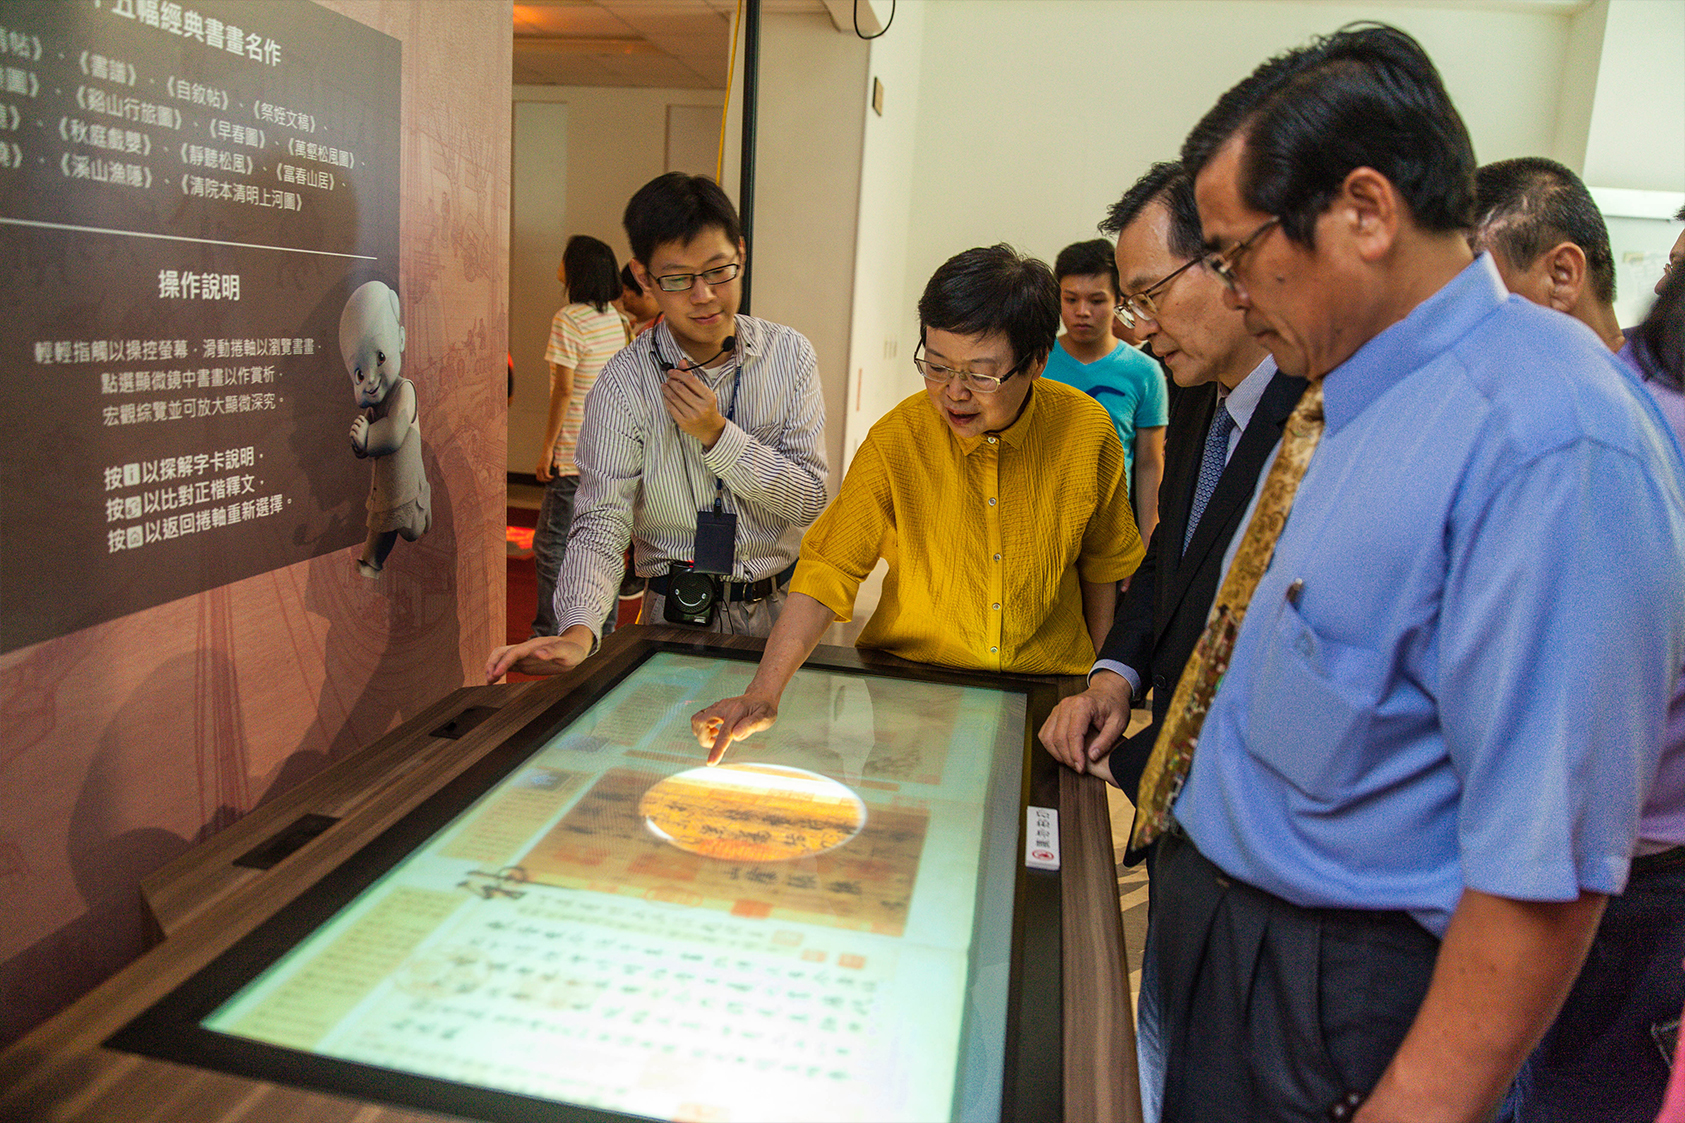 NPM Director Fung Mingchu demonstrates how to use the Must-See Interactive Tabletop to Taipower Company Chairman Huang Zhongqiu, et al.